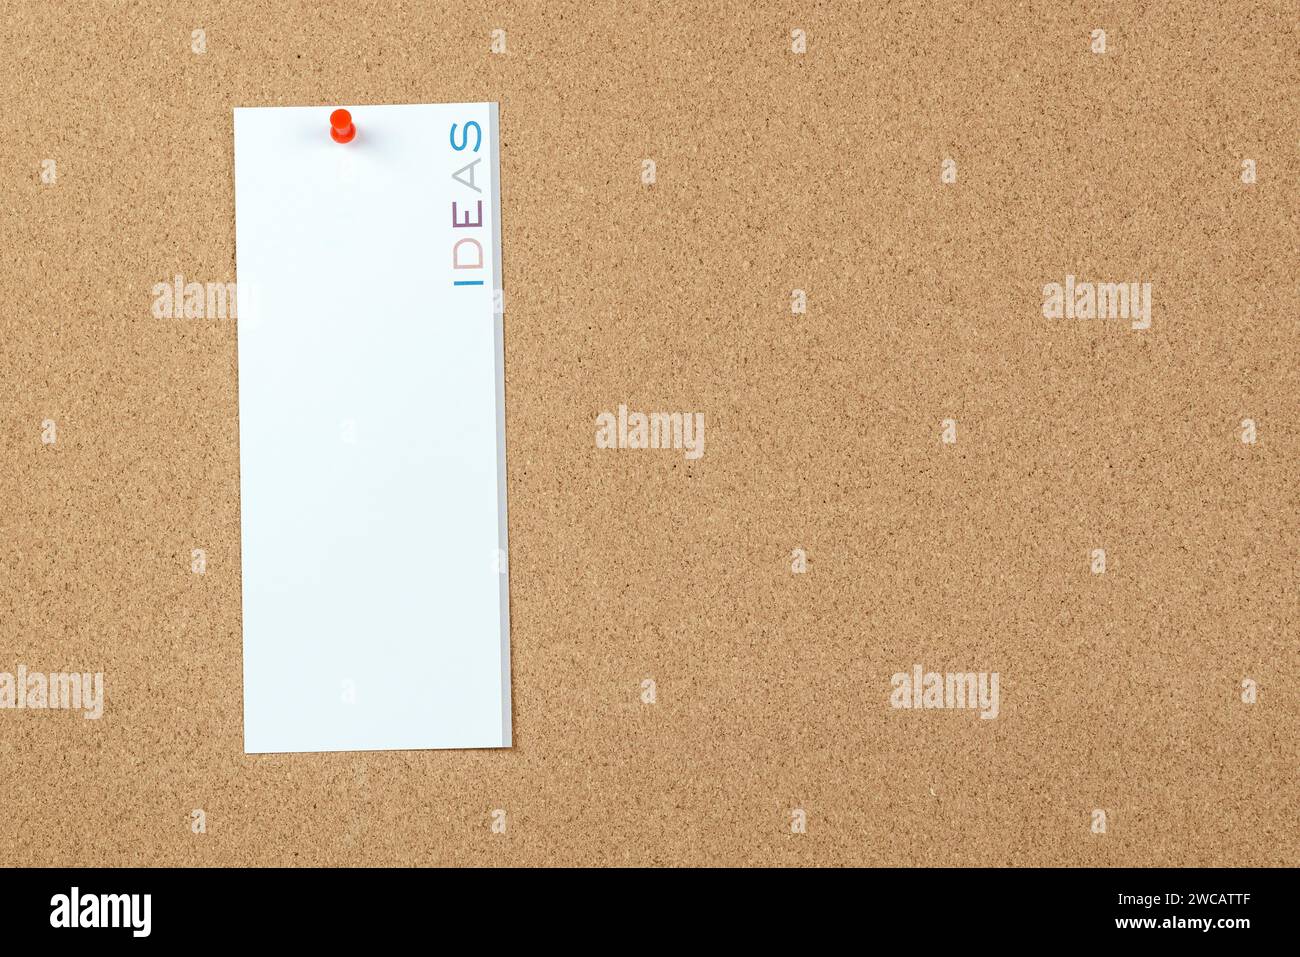 Blank notice with the word ideas printed in vertical on it on a cork board. Copy space. Stock Photo